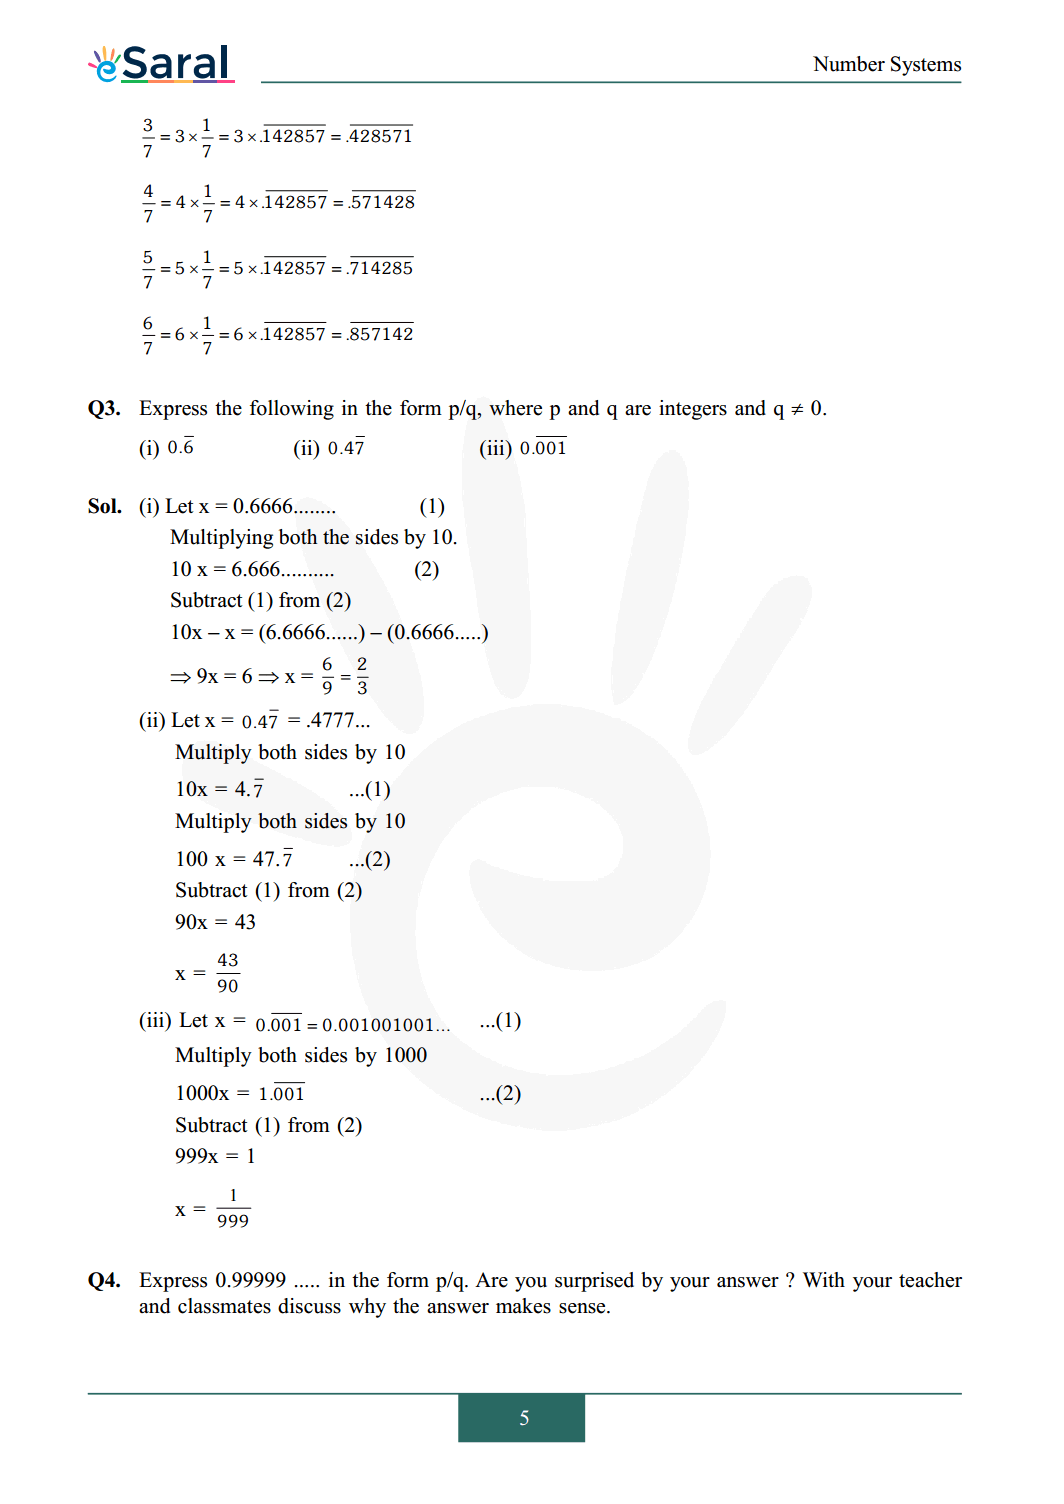 NCERT Solutions for Class 9 Maths chapter 1 Number Systems PDF Image 6